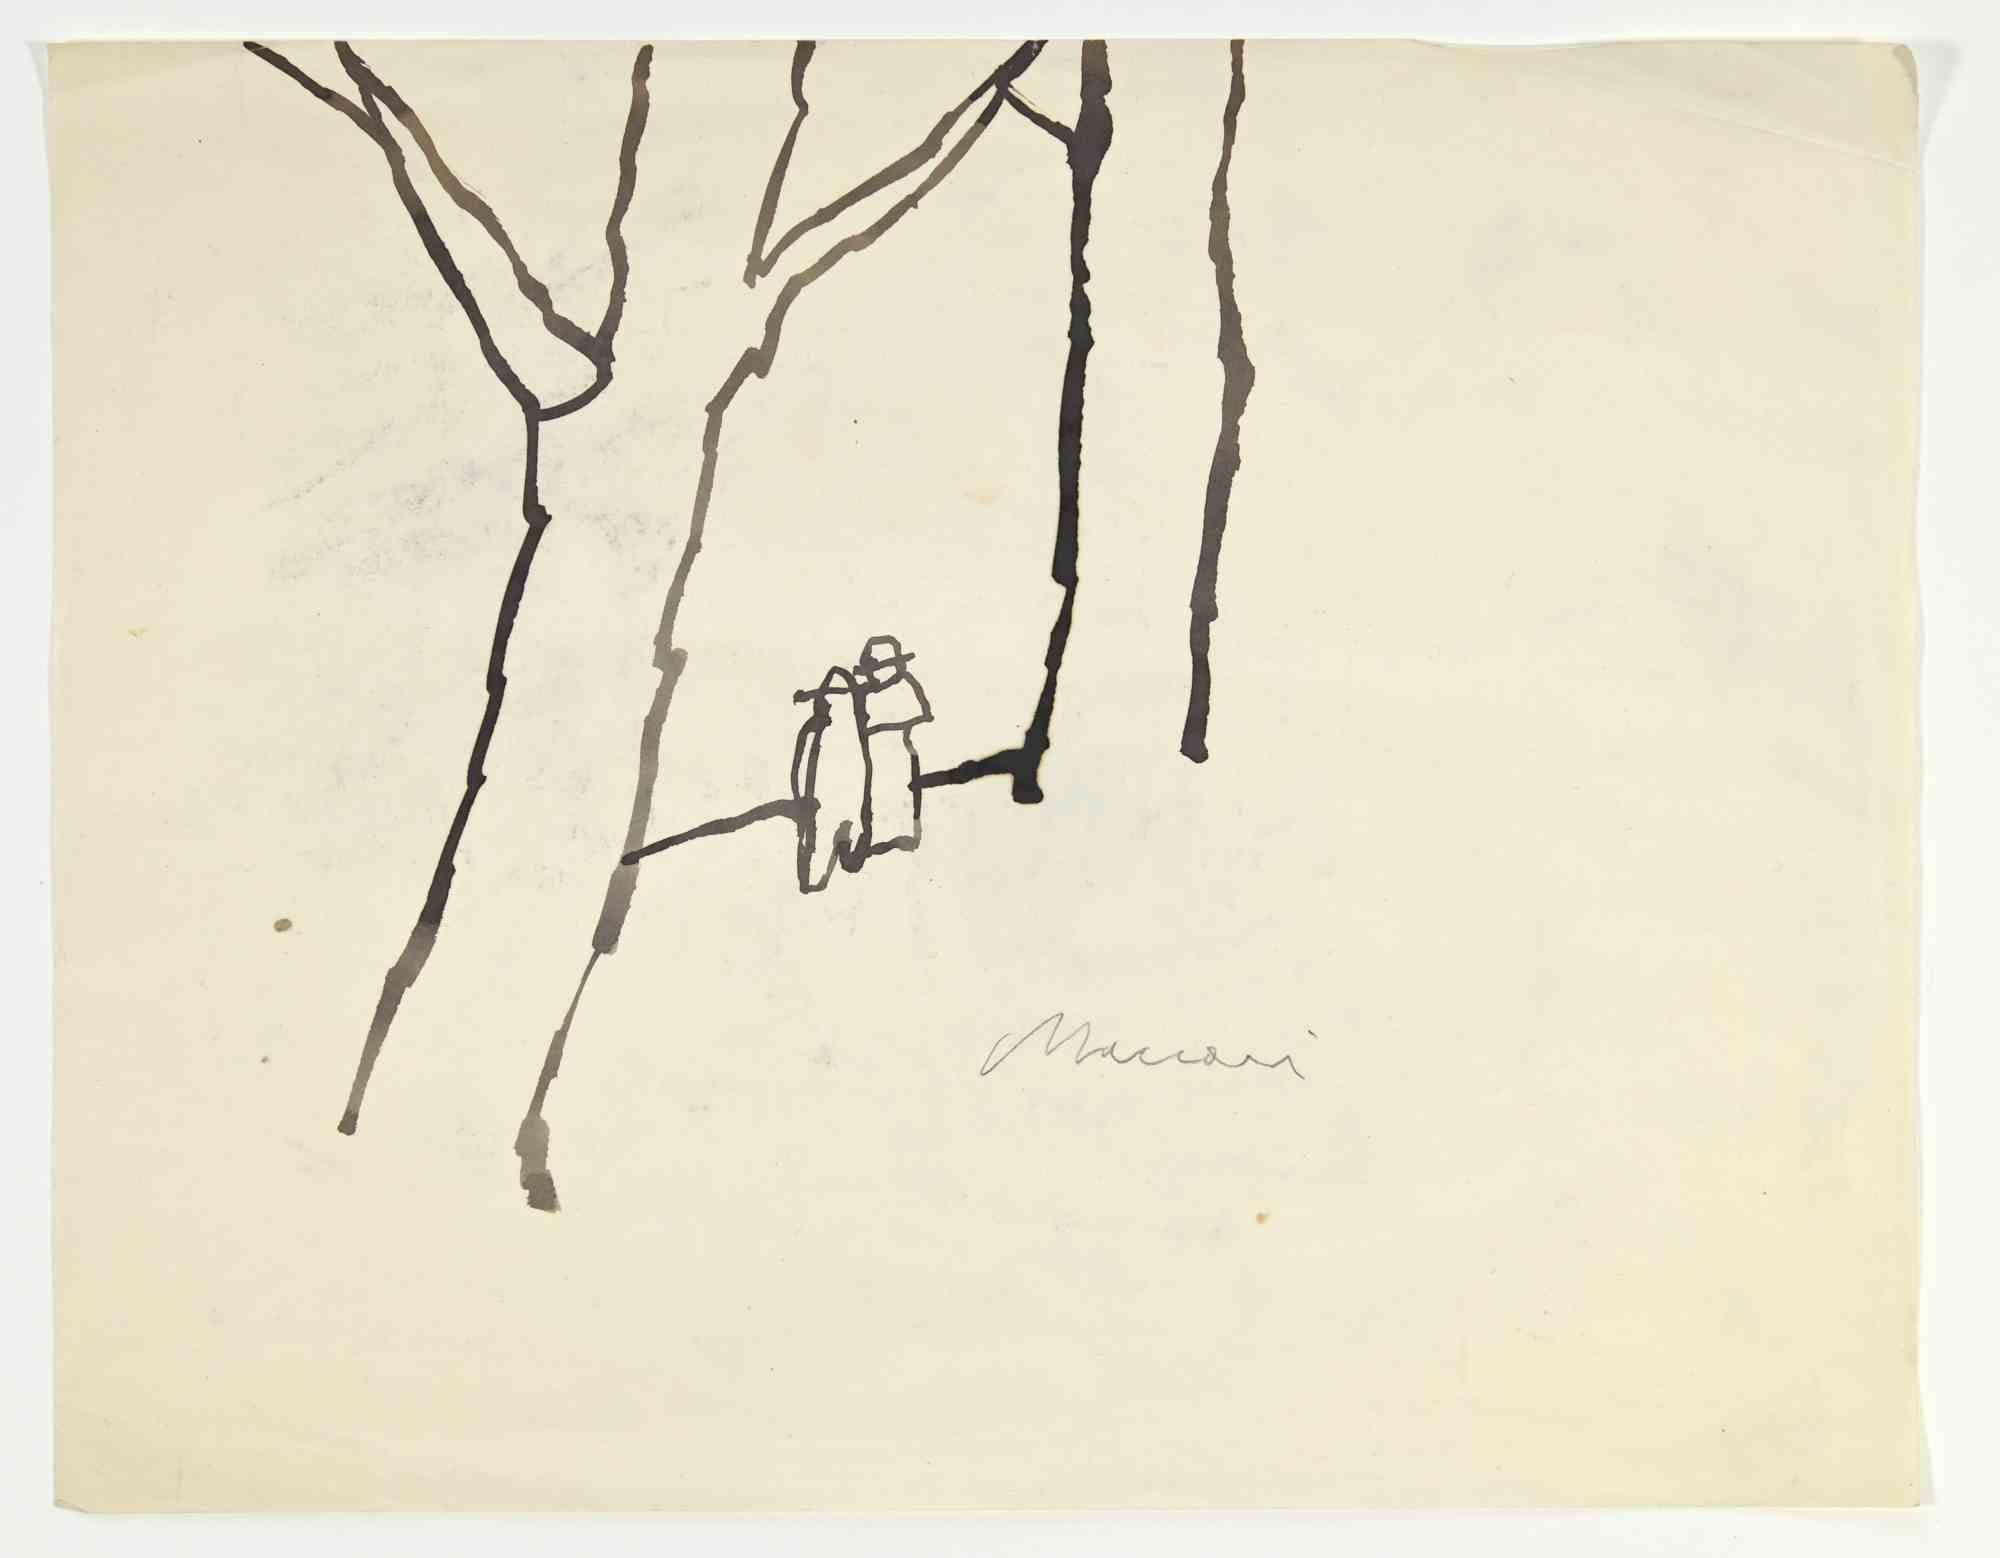 Into the Woods is a Watercolor Drawing realized by Mino Maccari  (1924-1989) in the 1960s.

Hand-signed on the lower.

Good condition with slight foxing and folds.

Mino Maccari (Siena, 1924-Rome, June 16, 1989) was an Italian writer, painter,